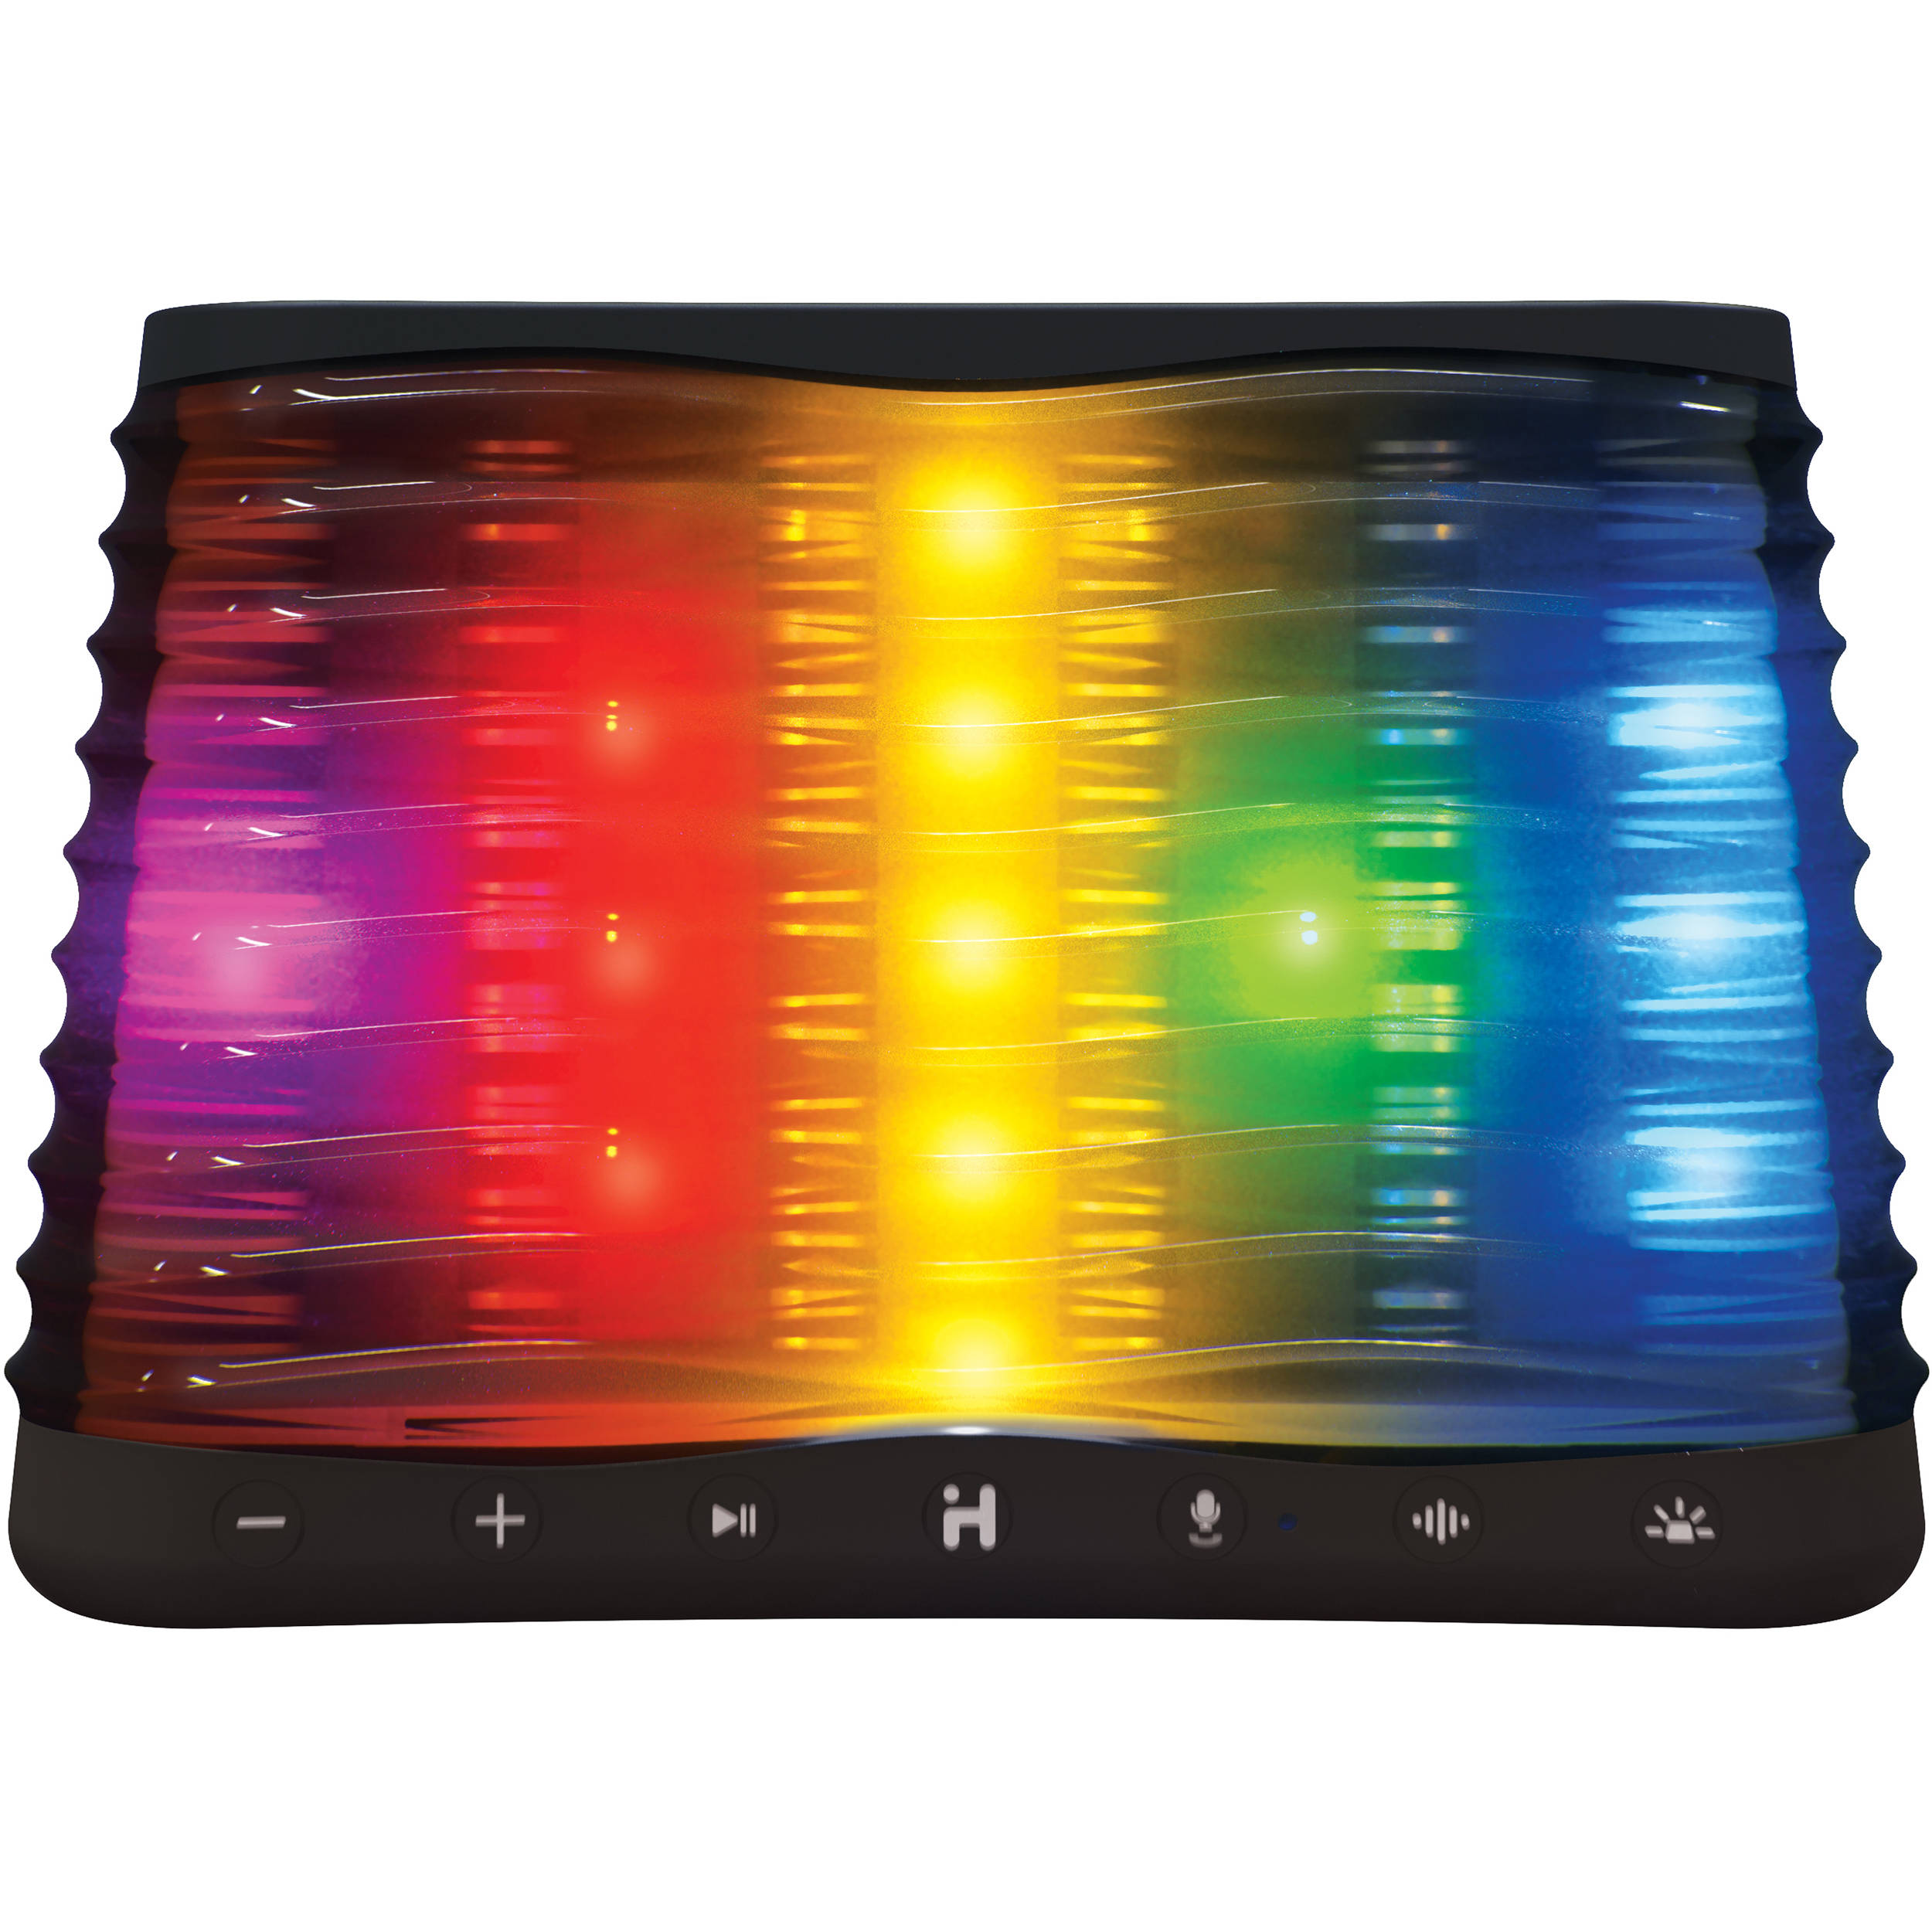 ihome wireless color changing speaker review